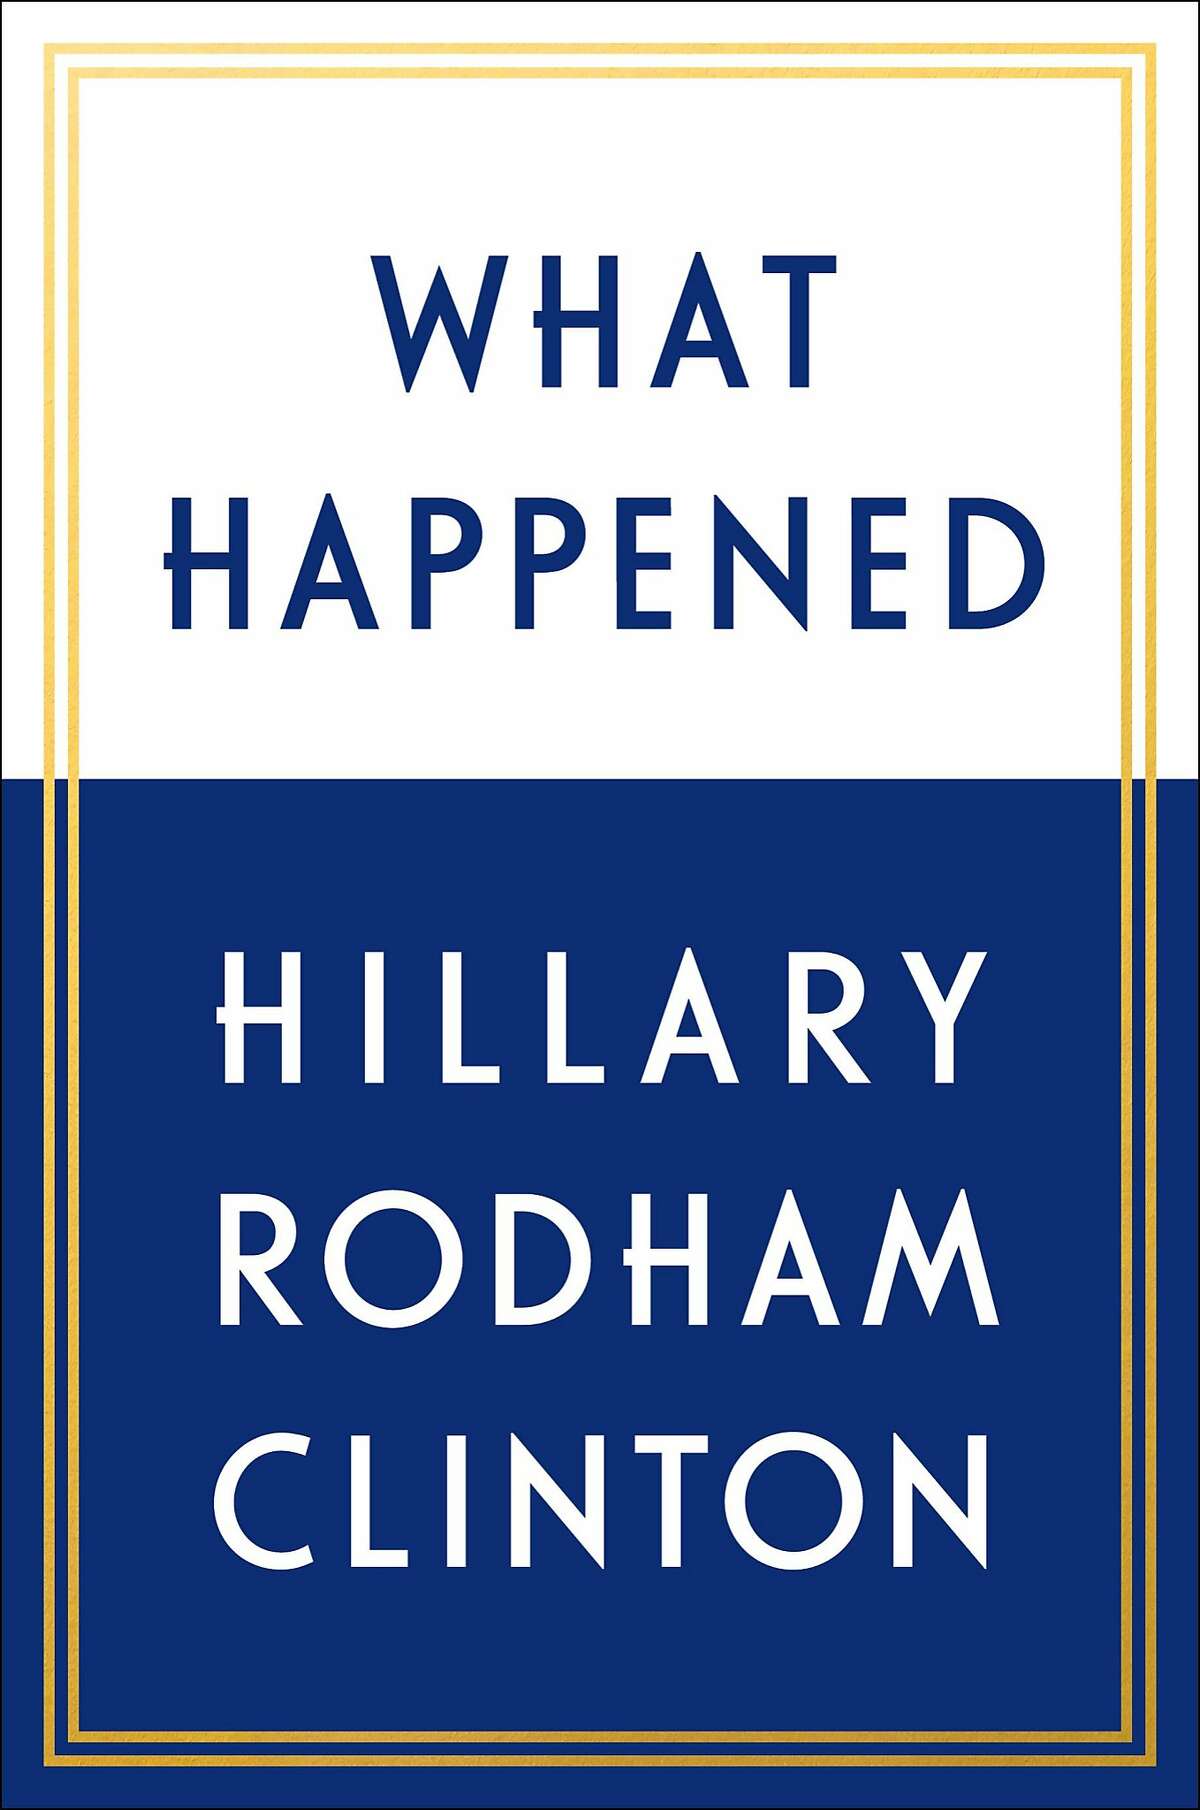 "What Happened"